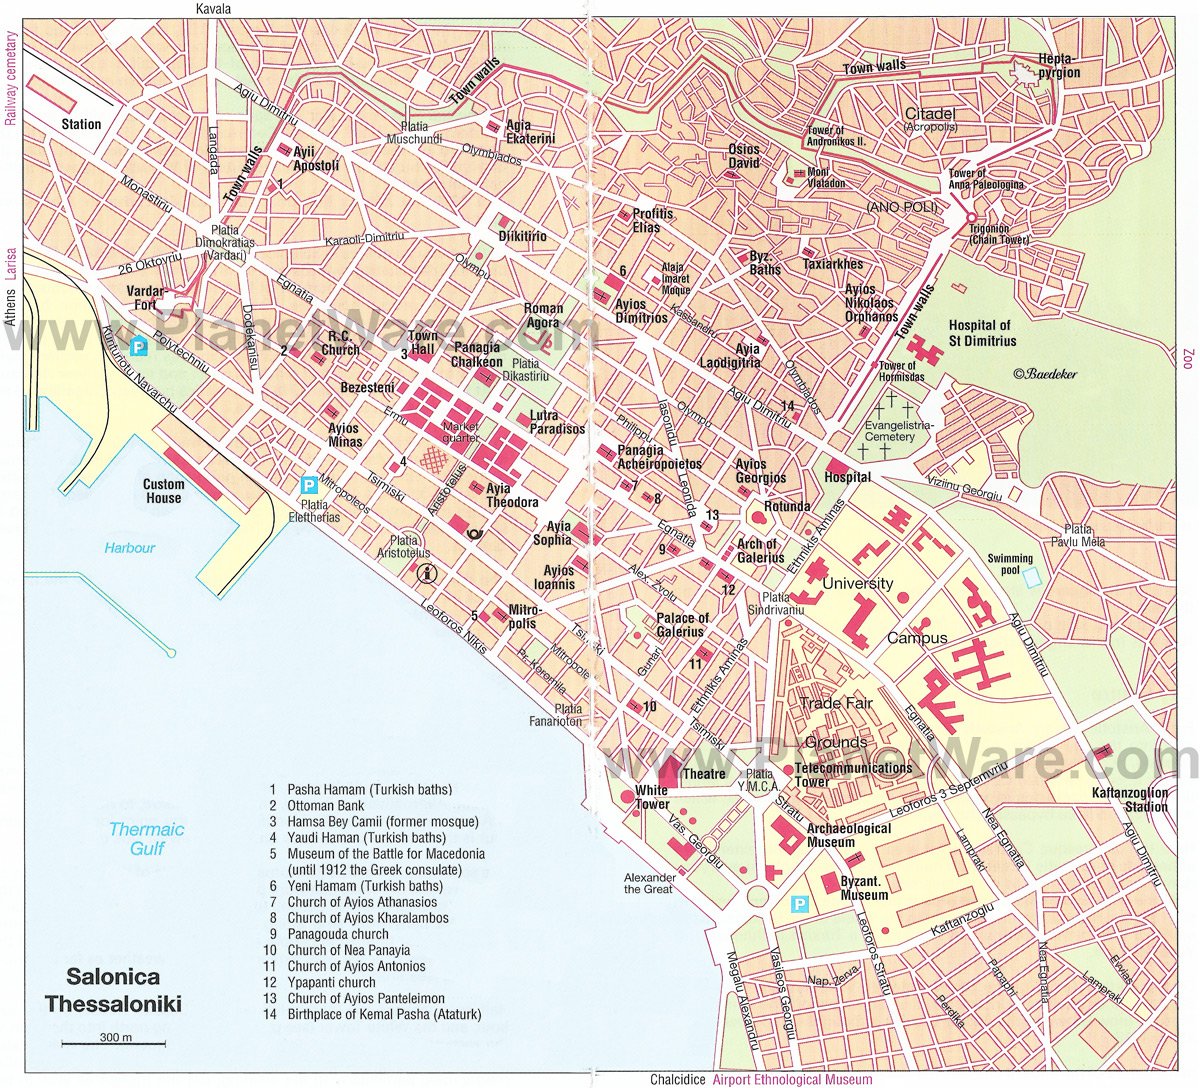 Salonica Map - Tourist Attractions